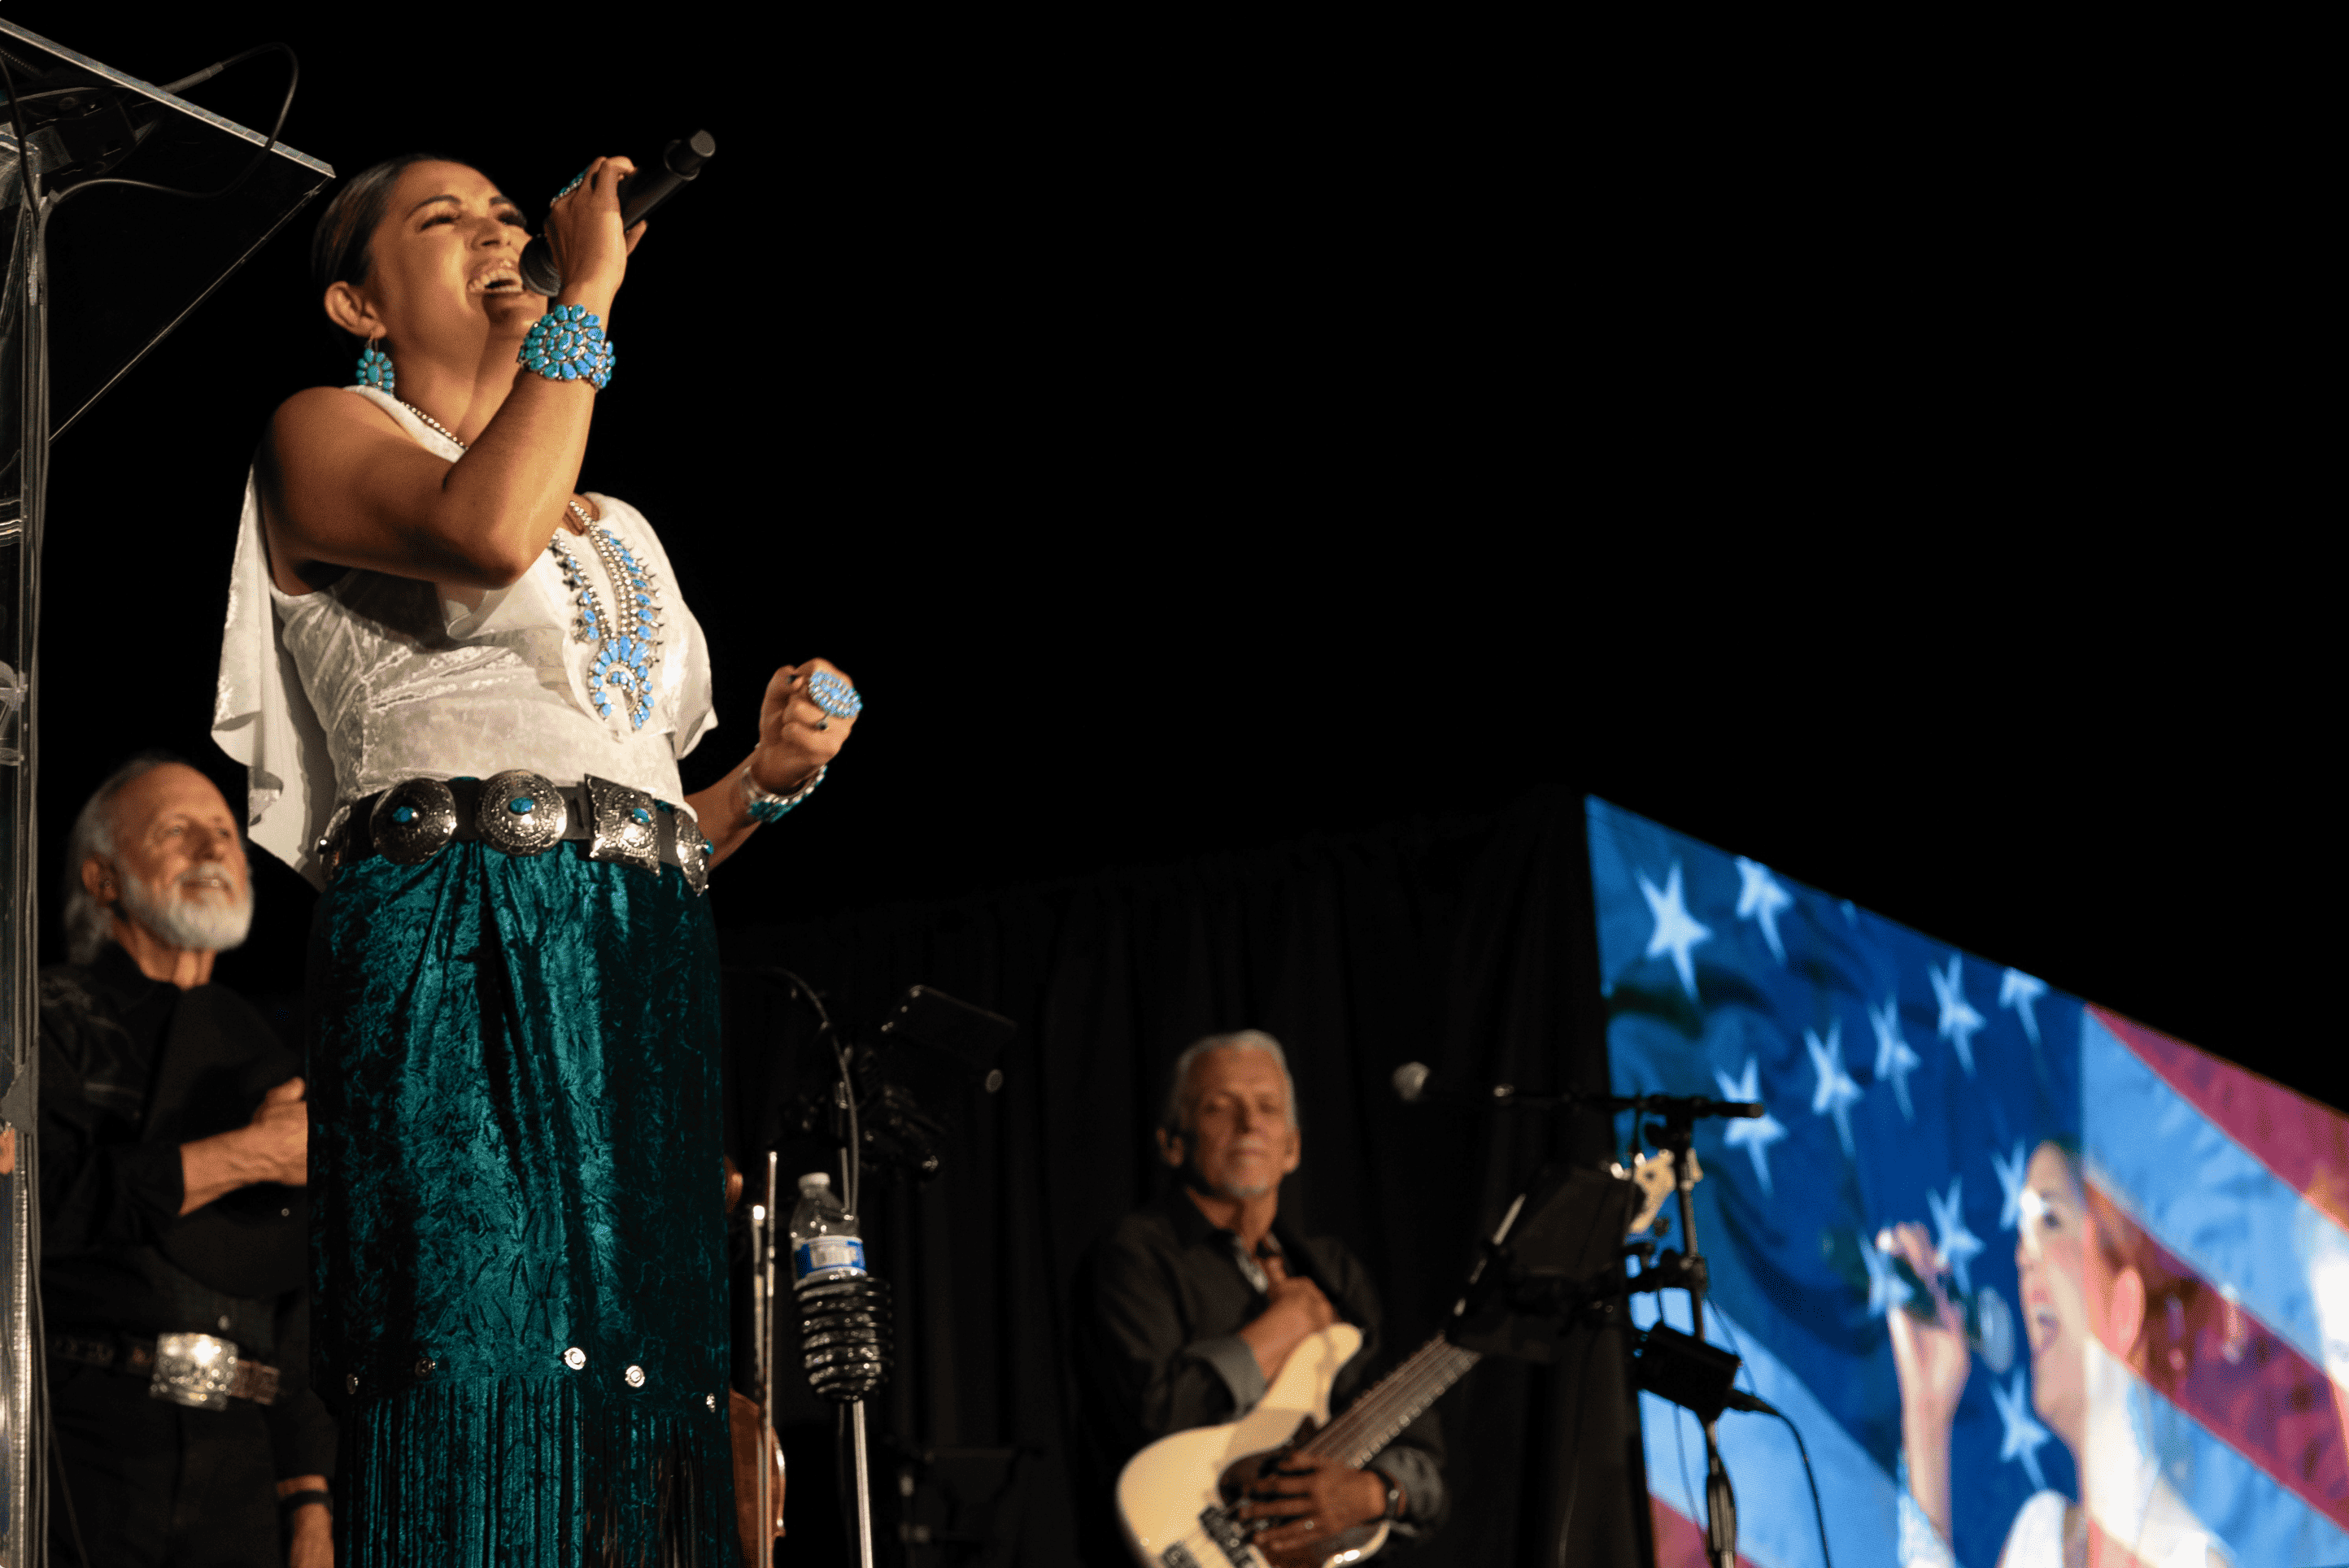 A female singer performing on stage with a microphone, accompanied by musicians, against the backdrop of a large screen displaying an American flag pattern during a moondance-themed set.